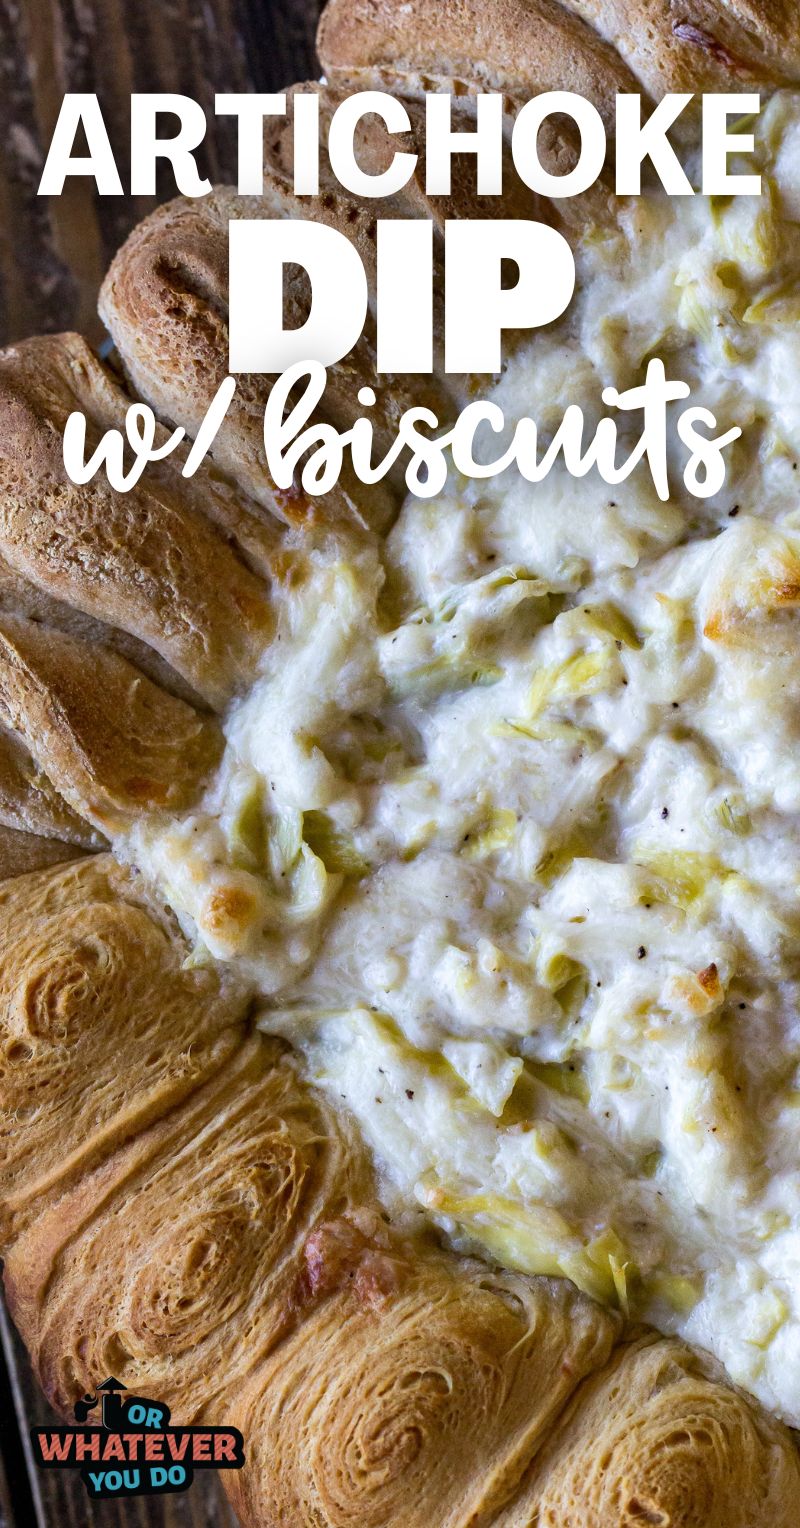 Artichoke Dip with Biscuits